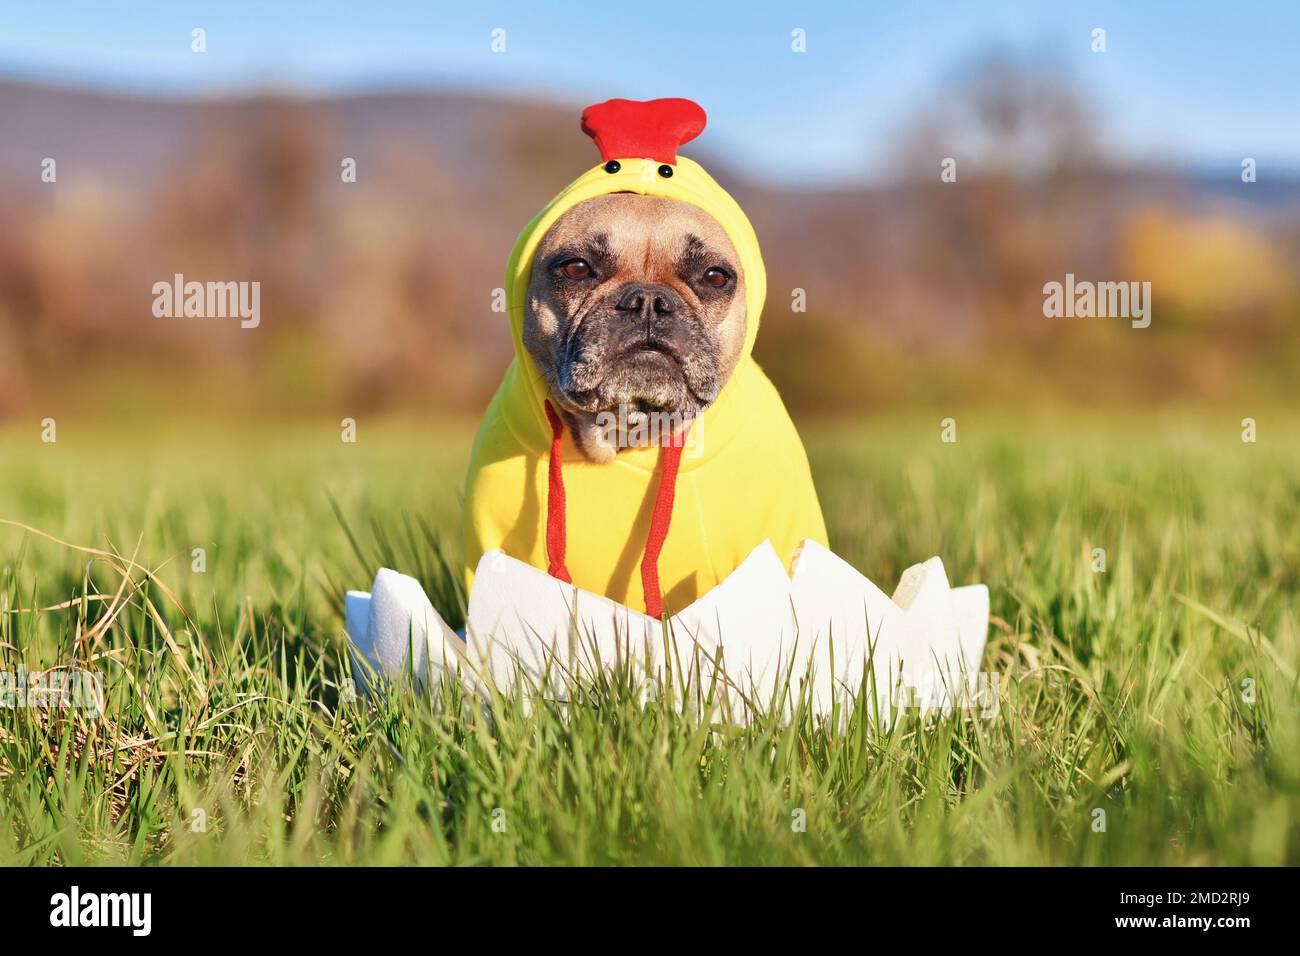 Funny Easter chicken dog. French Bulldog sitting in large Easter egg wearing a costume Stock Photo